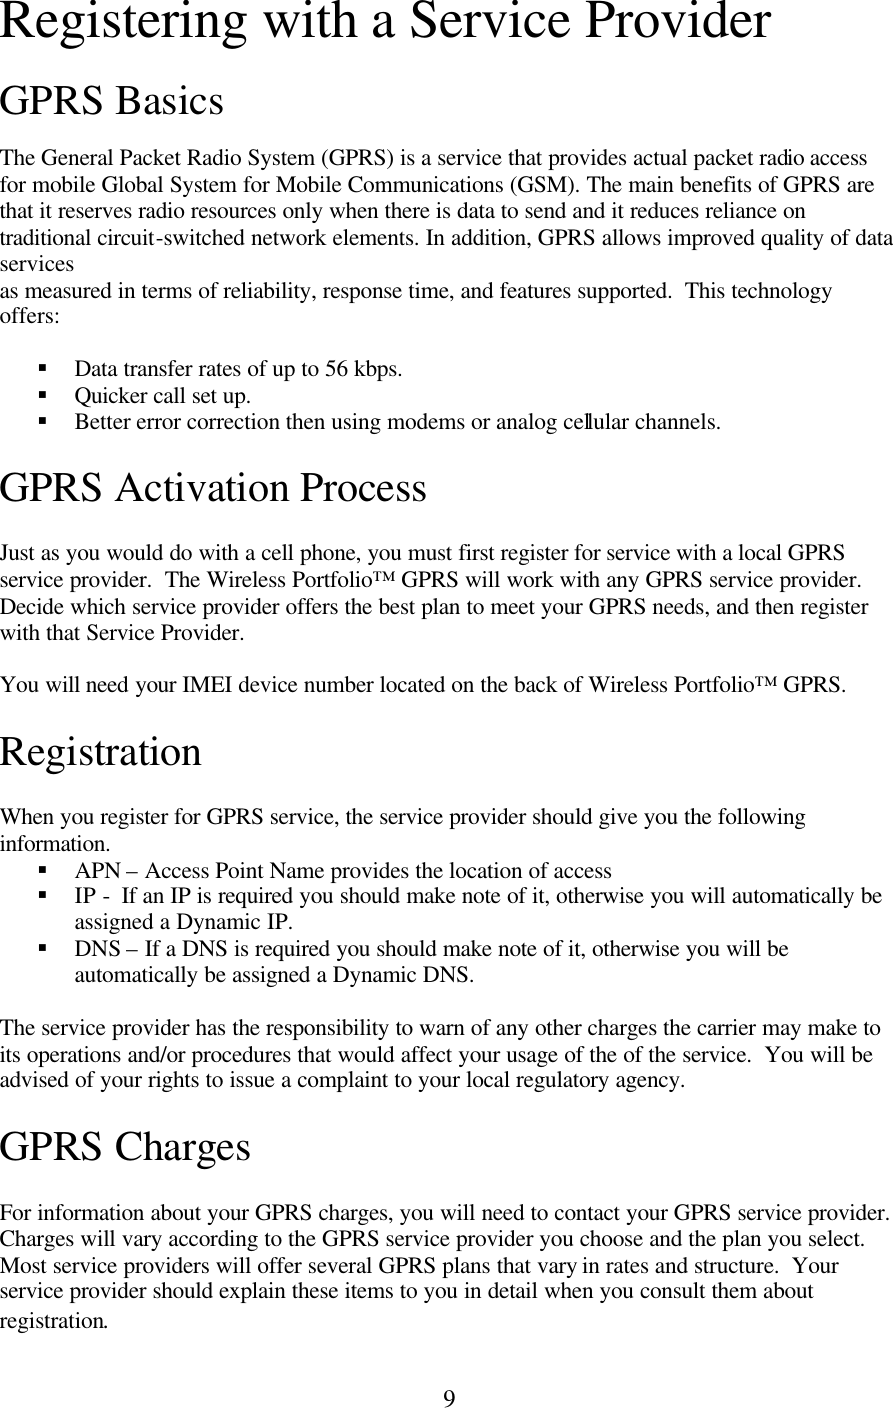 9 Registering with a Service Provider  GPRS Basics  The General Packet Radio System (GPRS) is a service that provides actual packet radio access for mobile Global System for Mobile Communications (GSM). The main benefits of GPRS are that it reserves radio resources only when there is data to send and it reduces reliance on traditional circuit-switched network elements. In addition, GPRS allows improved quality of data services as measured in terms of reliability, response time, and features supported.  This technology offers:  § Data transfer rates of up to 56 kbps. § Quicker call set up. § Better error correction then using modems or analog cellular channels.  GPRS Activation Process  Just as you would do with a cell phone, you must first register for service with a local GPRS service provider.  The Wireless Portfolio™ GPRS will work with any GPRS service provider.  Decide which service provider offers the best plan to meet your GPRS needs, and then register with that Service Provider.  You will need your IMEI device number located on the back of Wireless Portfolio™ GPRS.  Registration  When you register for GPRS service, the service provider should give you the following information. § APN – Access Point Name provides the location of access § IP -  If an IP is required you should make note of it, otherwise you will automatically be assigned a Dynamic IP. § DNS – If a DNS is required you should make note of it, otherwise you will be automatically be assigned a Dynamic DNS.  The service provider has the responsibility to warn of any other charges the carrier may make to its operations and/or procedures that would affect your usage of the of the service.  You will be advised of your rights to issue a complaint to your local regulatory agency.  GPRS Charges  For information about your GPRS charges, you will need to contact your GPRS service provider.  Charges will vary according to the GPRS service provider you choose and the plan you select.  Most service providers will offer several GPRS plans that vary in rates and structure.  Your service provider should explain these items to you in detail when you consult them about registration. 